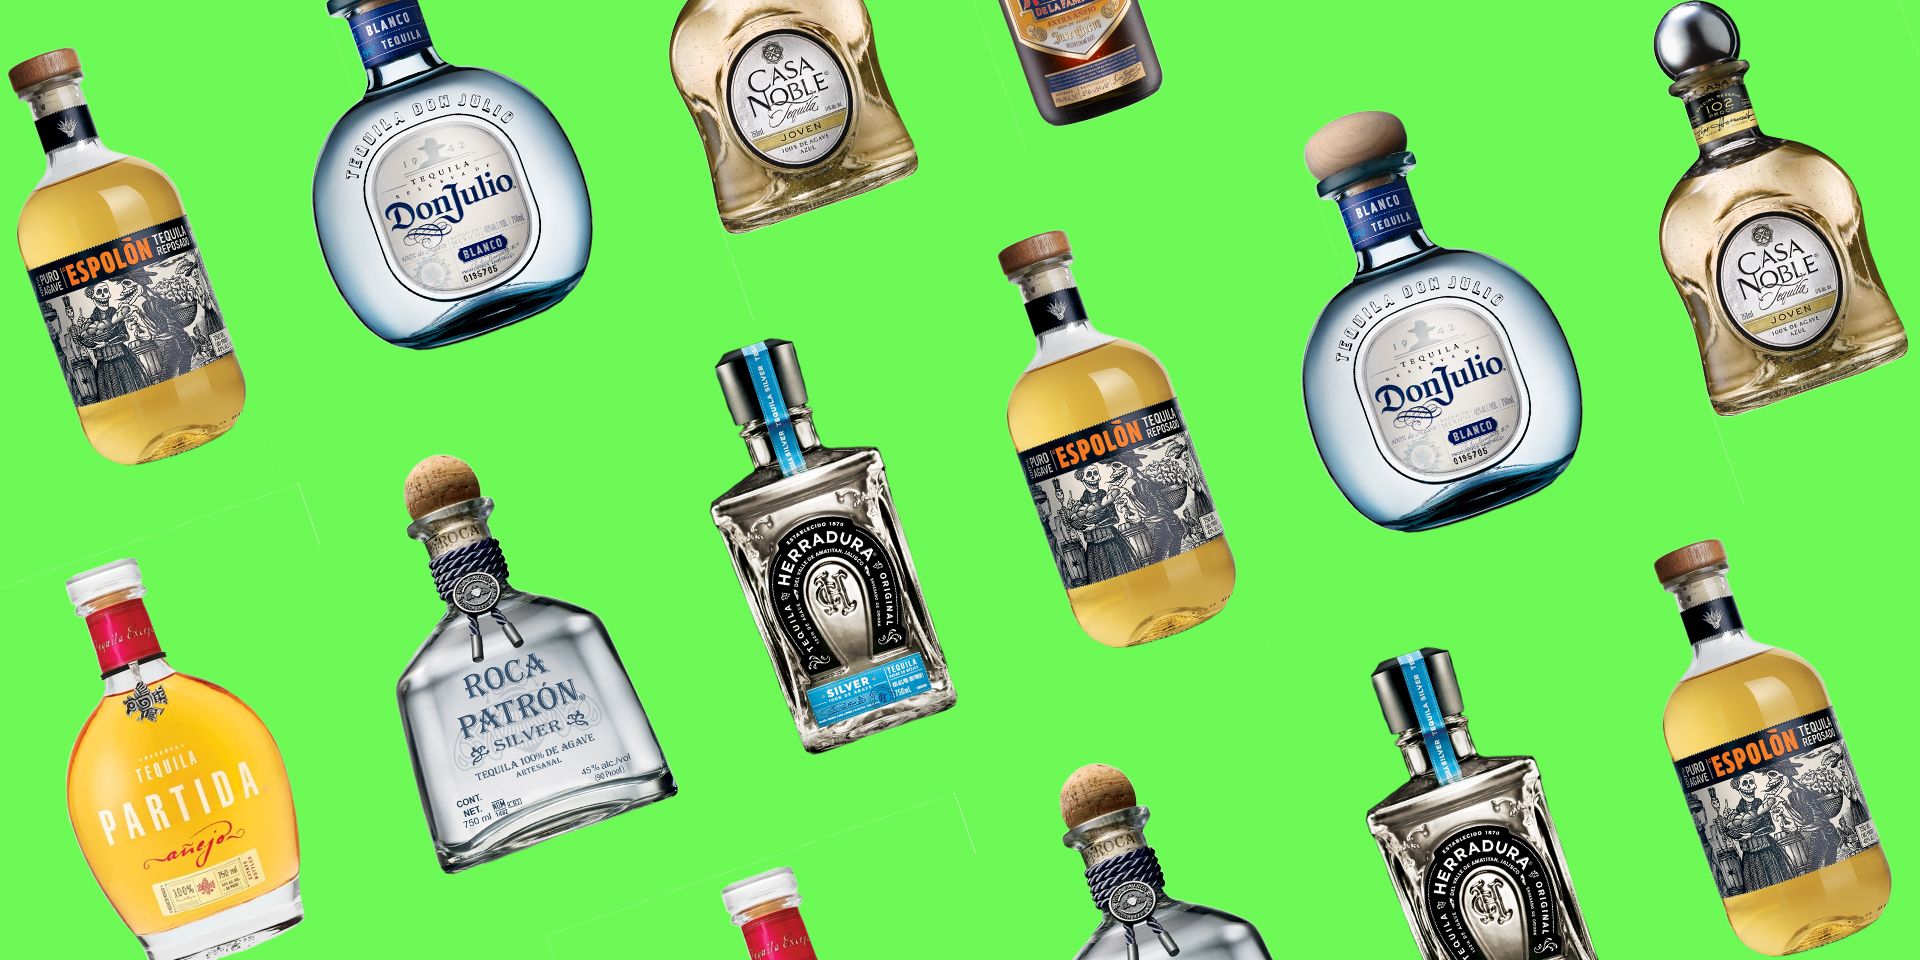 12 Best Tequila Brands 2020 What Tequila Bottles To Buy Right Now,Tiki Drinks Vintage